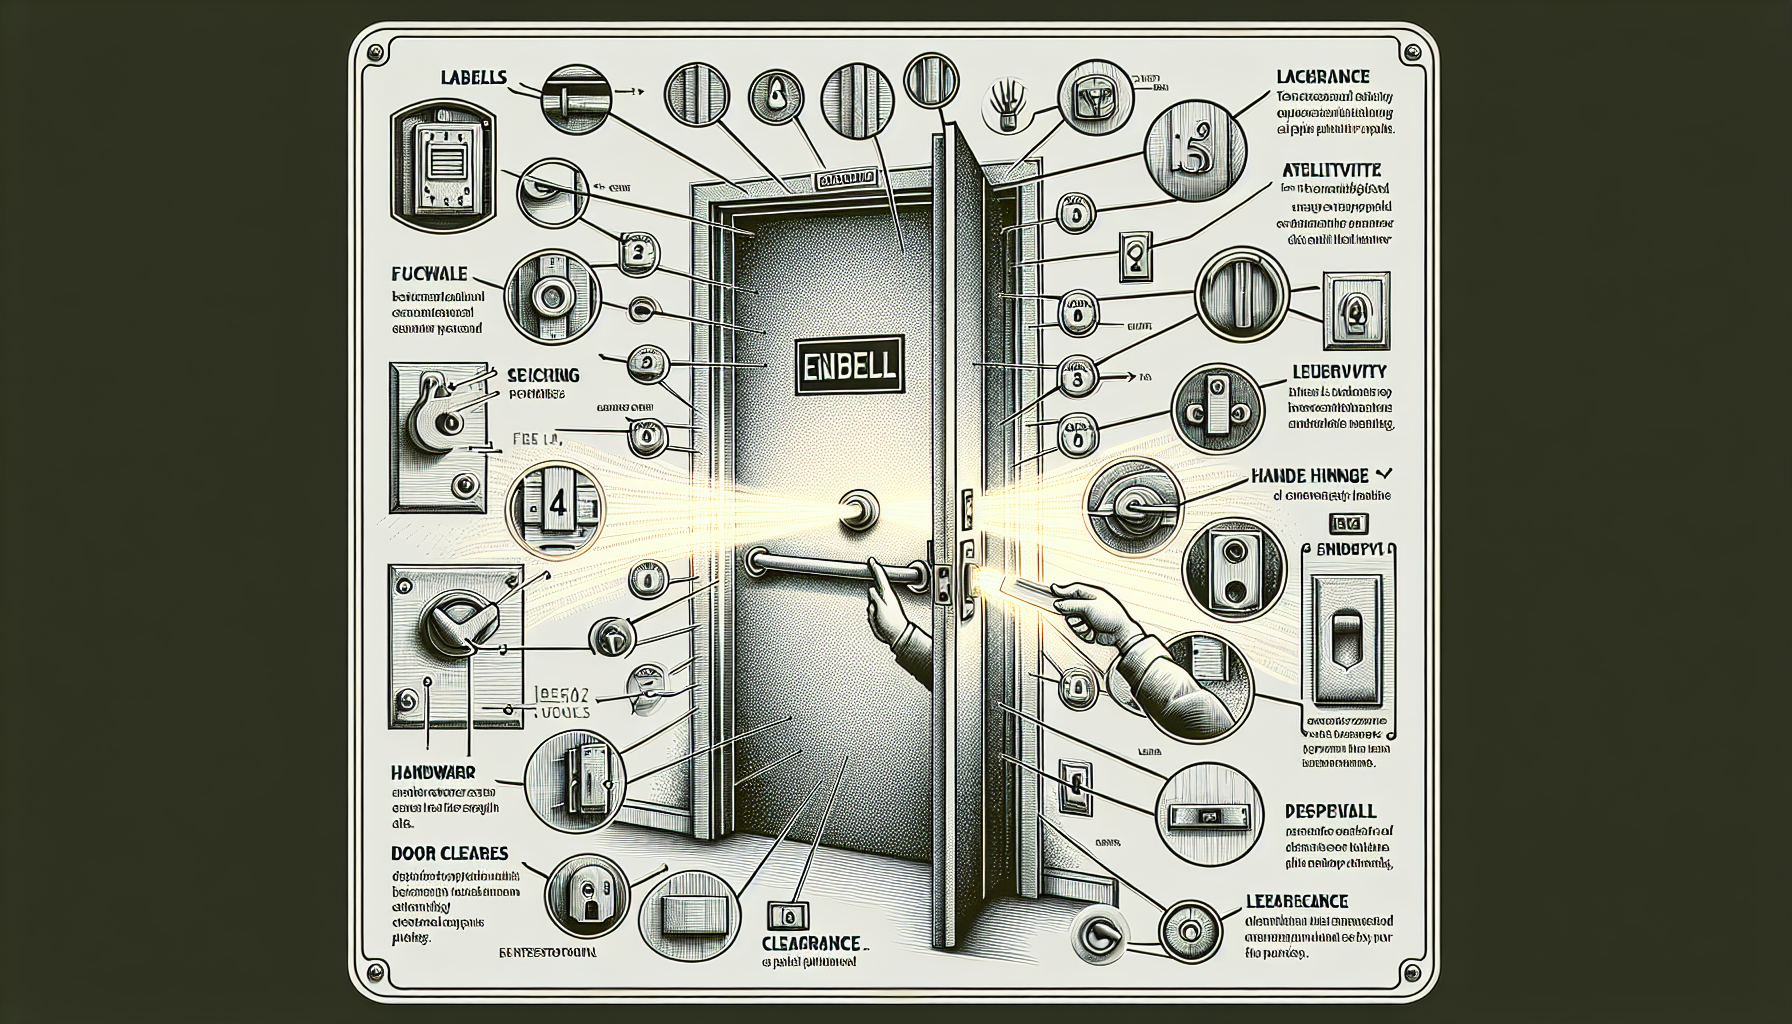 Illustration of key elements in a fire door inspection checklist